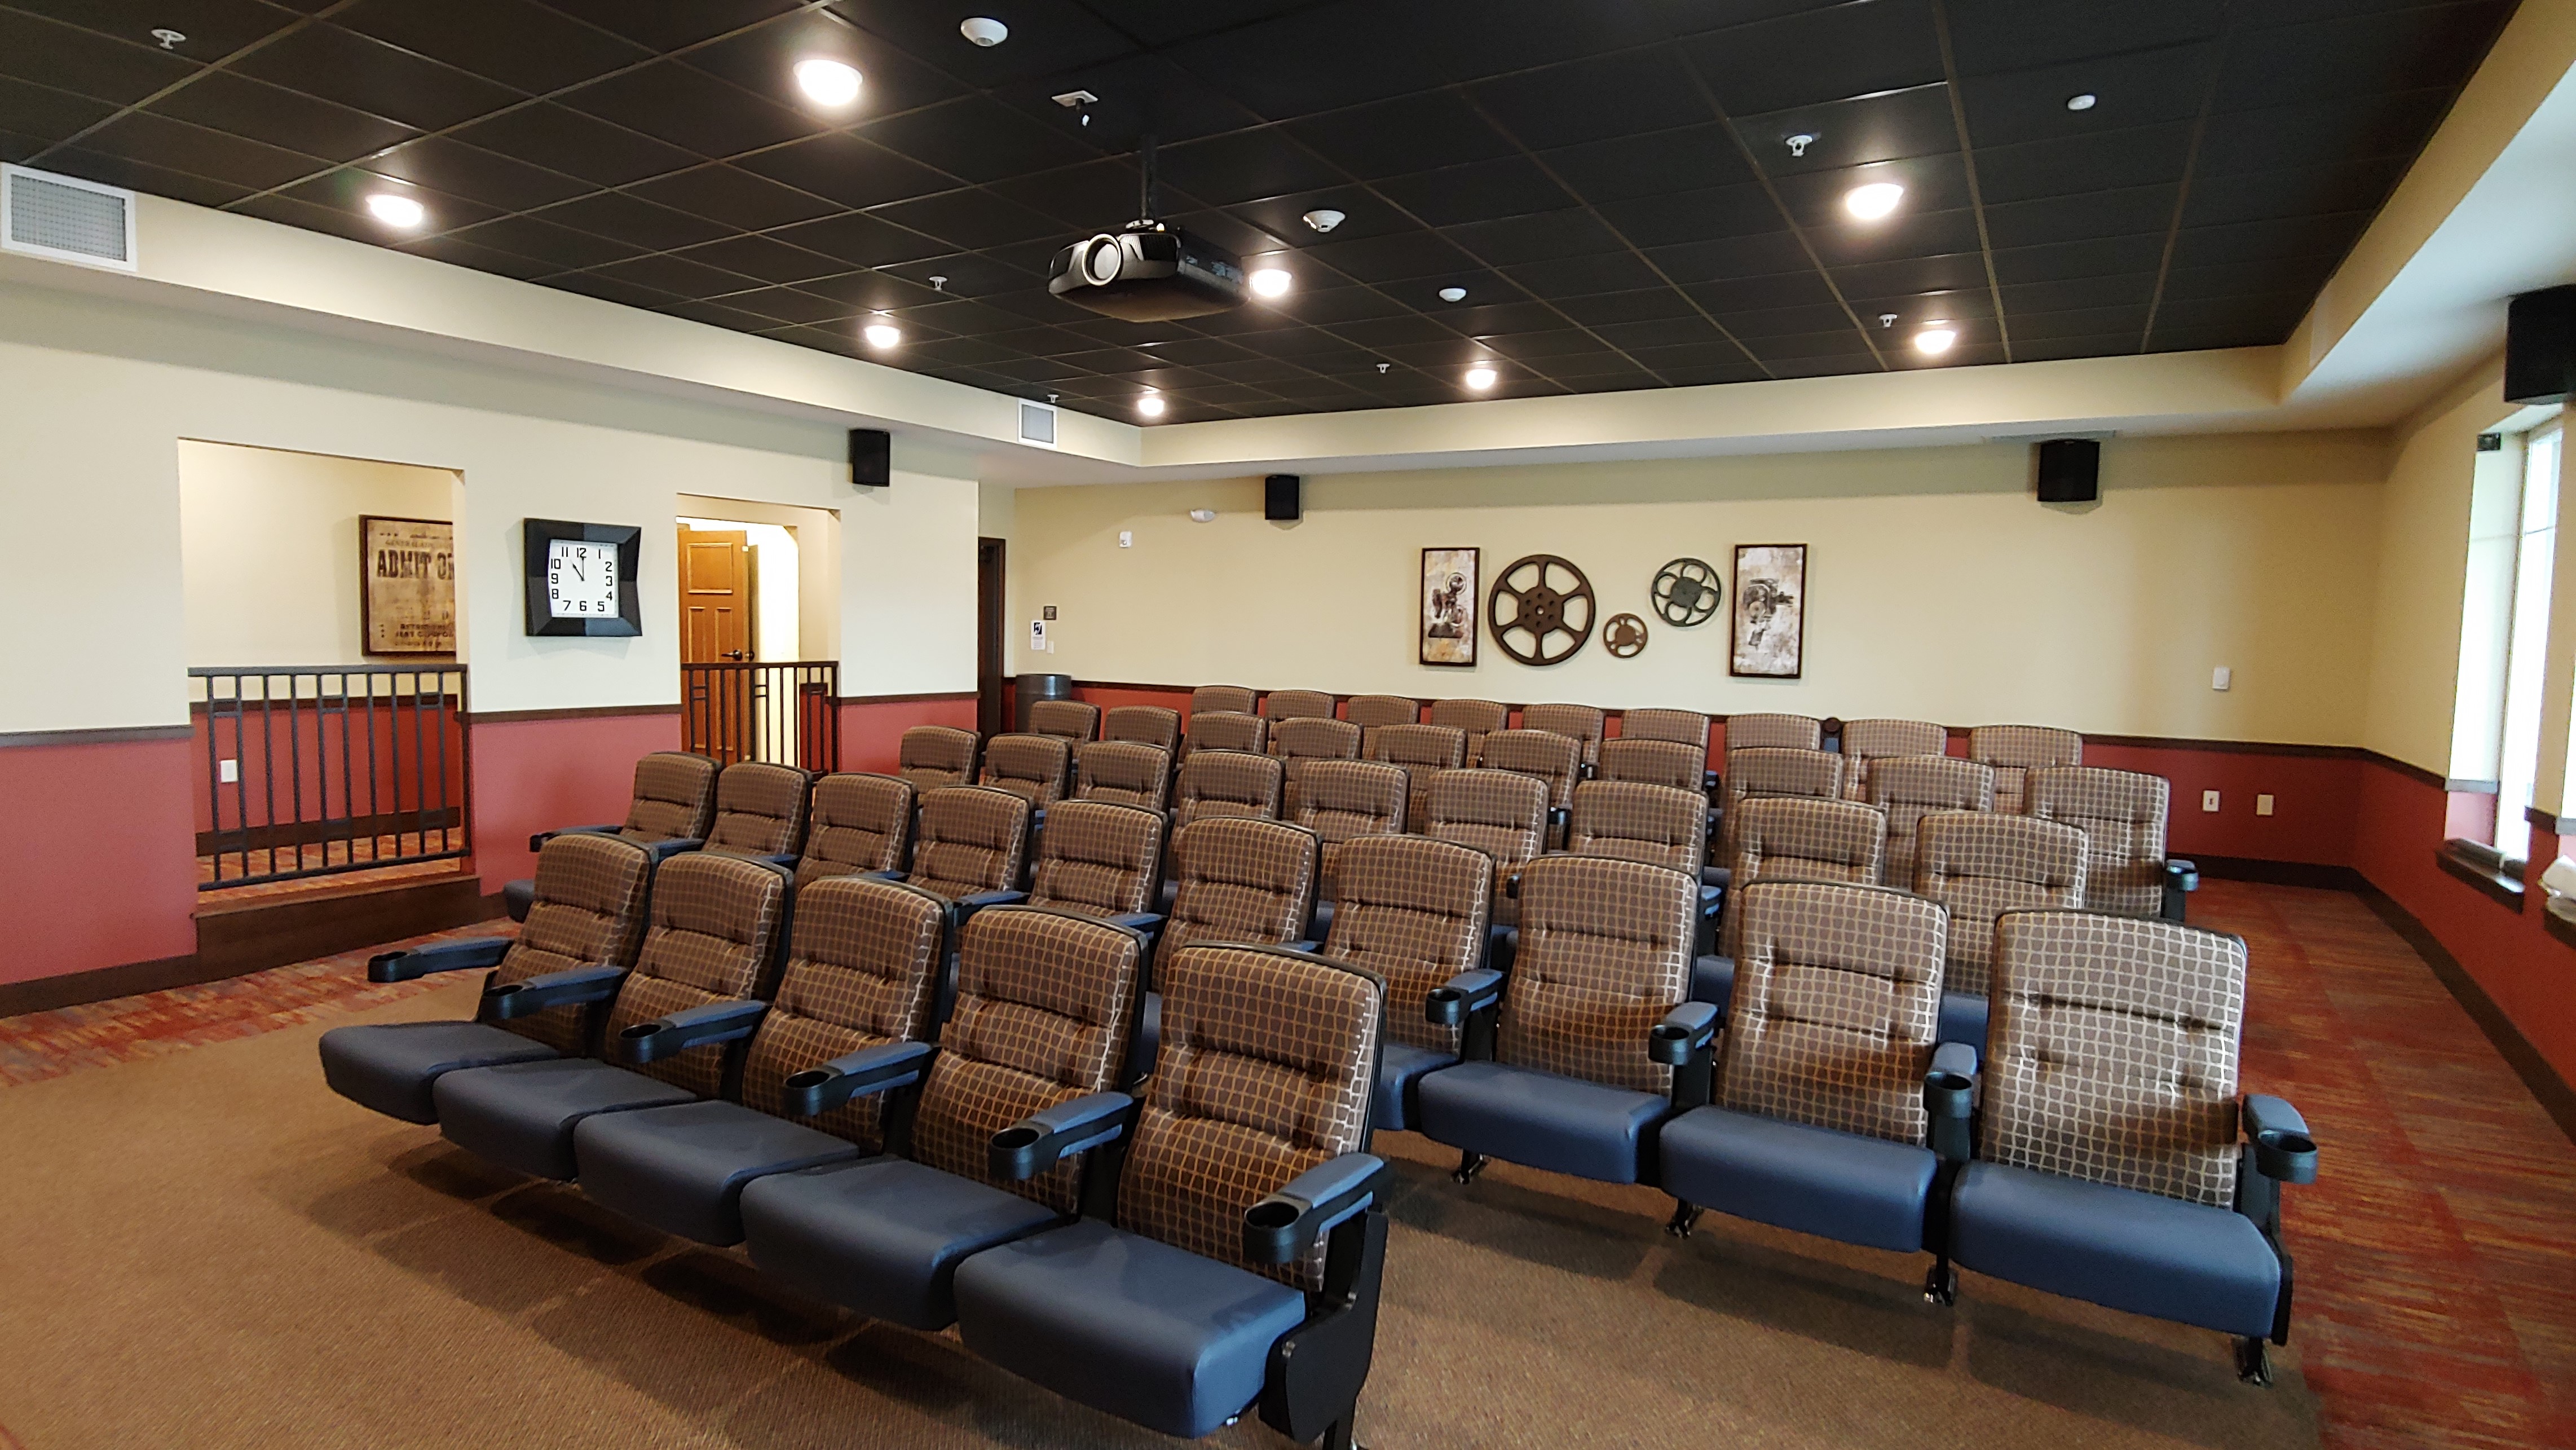 Wesley Bradley Park has several multi-use spaces, including this learning center/theater.